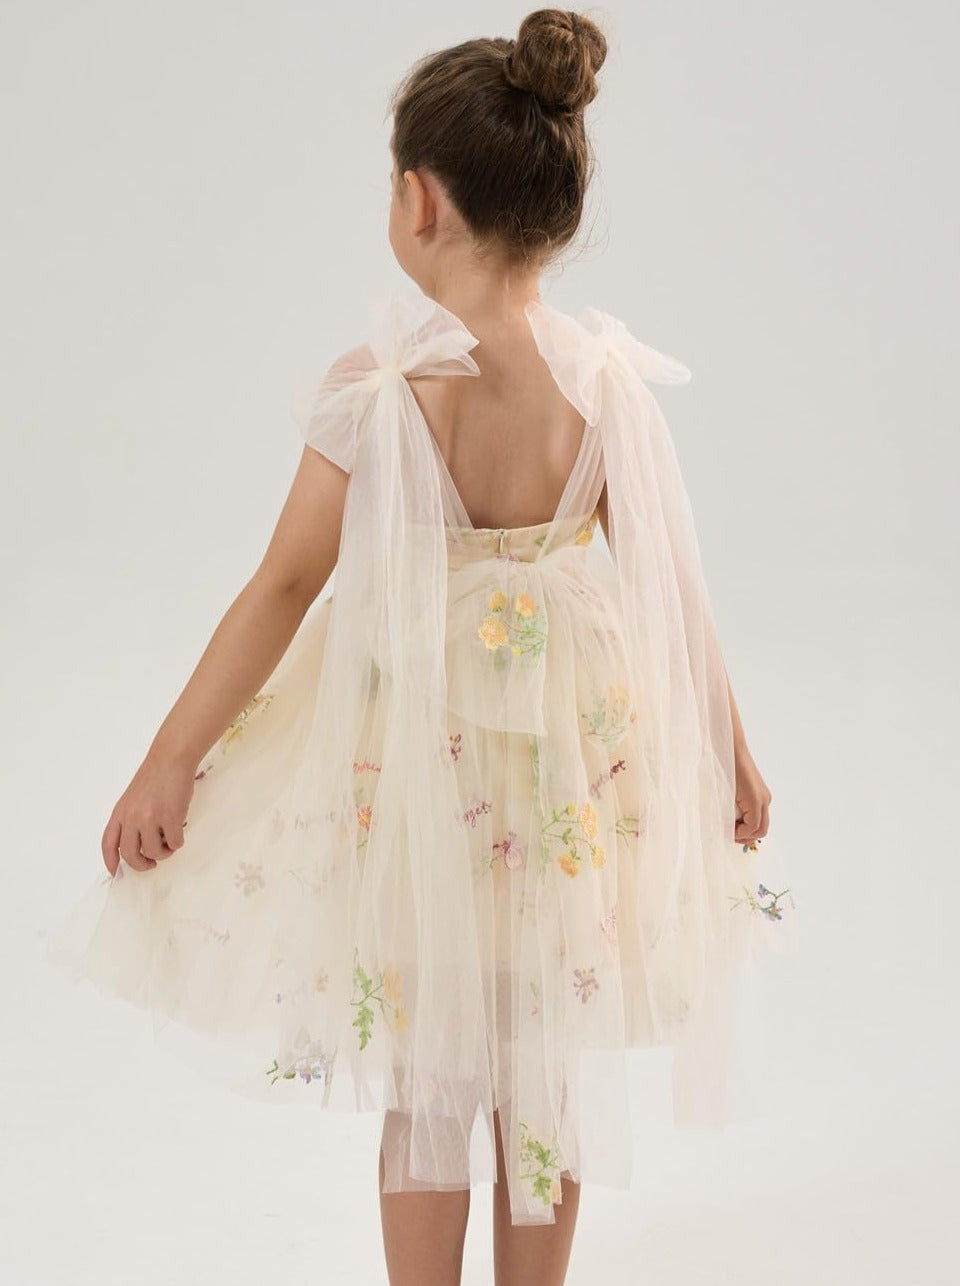 Floral Embroidered Tulle Girl Dress in Ivory Knee